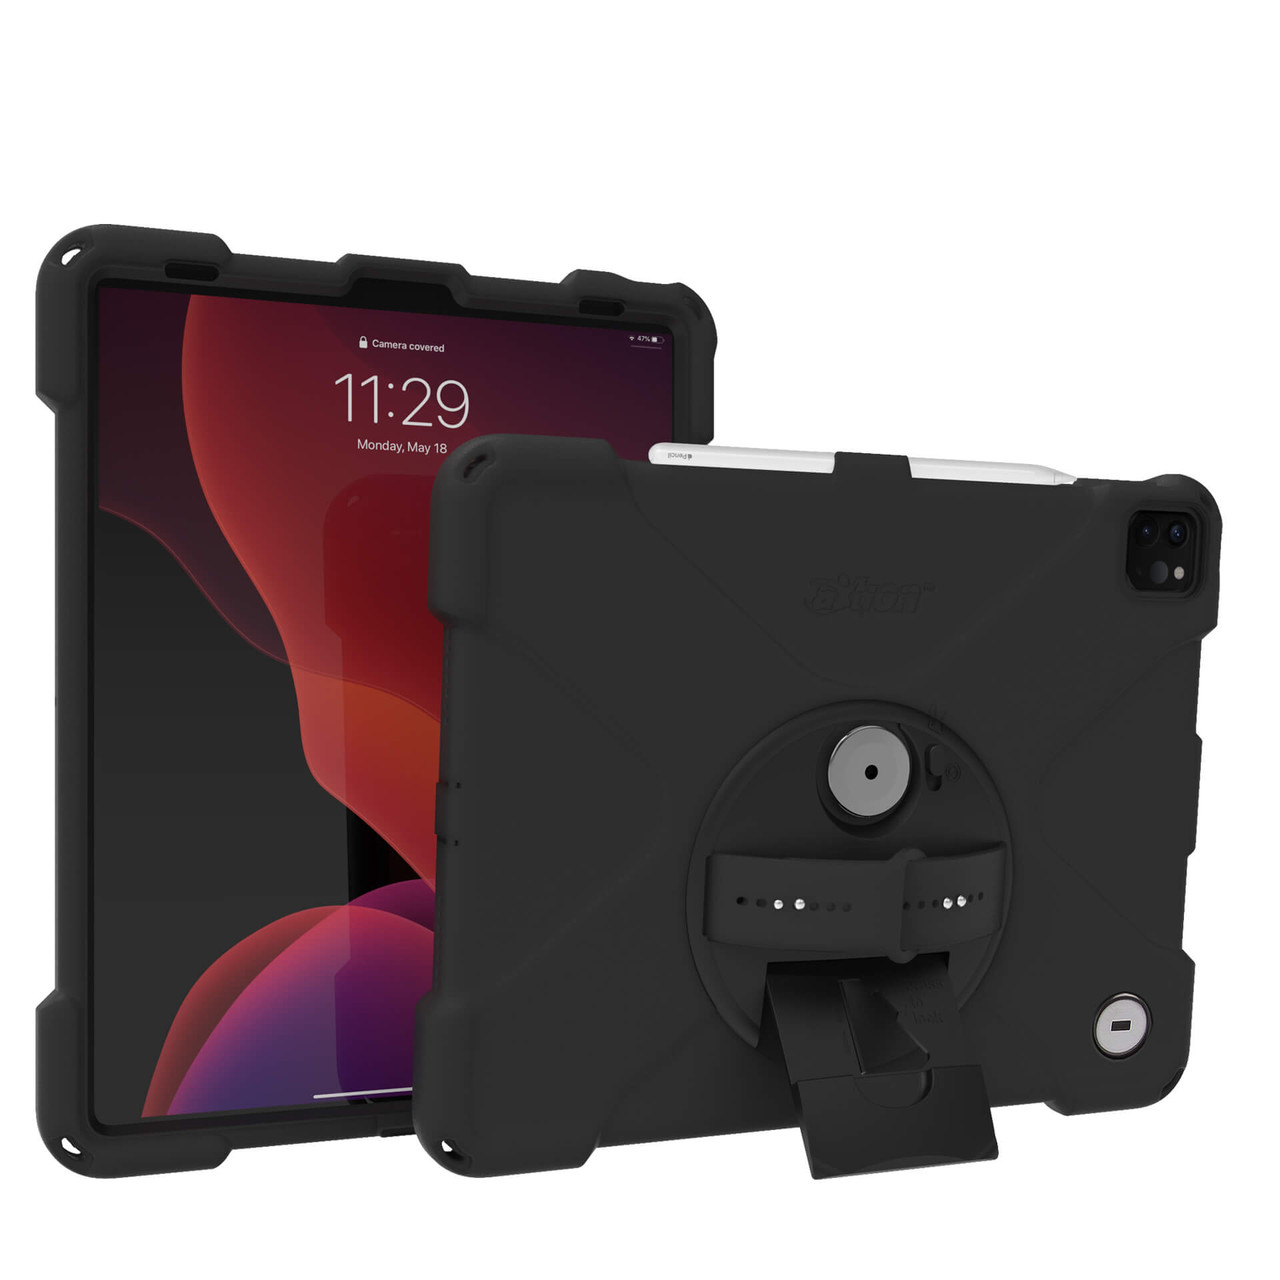 Coque de protection iPad 12.9 - SUPPORT-TABLETTE